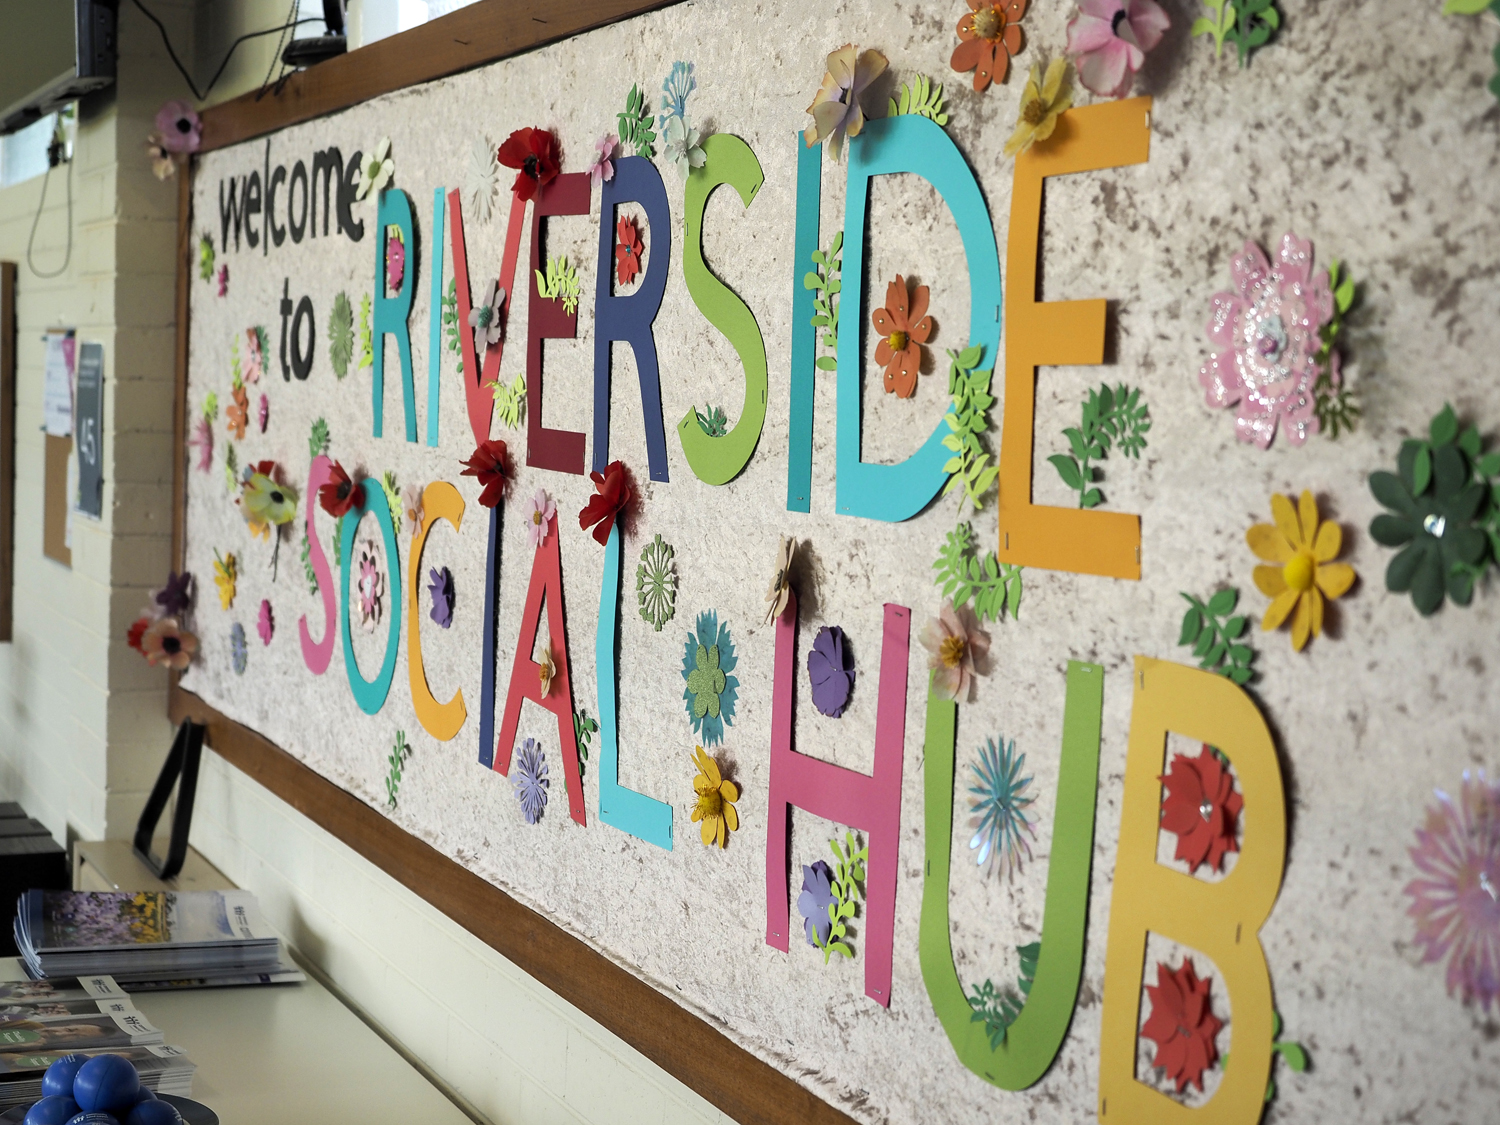 A custom made sign that says Welcome to Riverside Social Hub